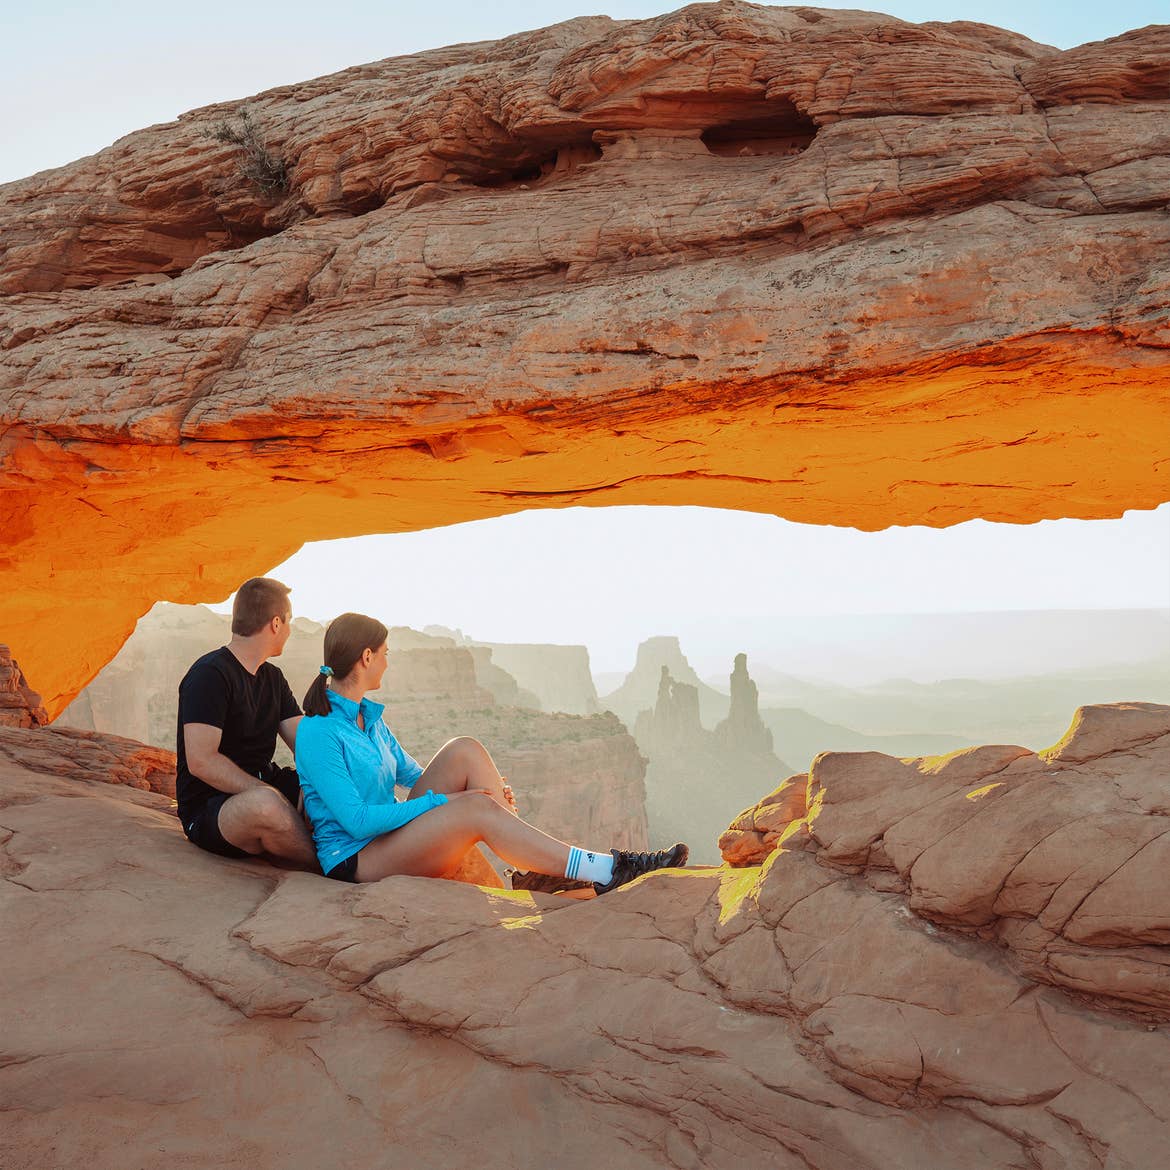 A man in black t-shirt and shorts sits behind a woman in blue pullover and shorts sitting on a red rock formation overlooking the Moab rock formations.